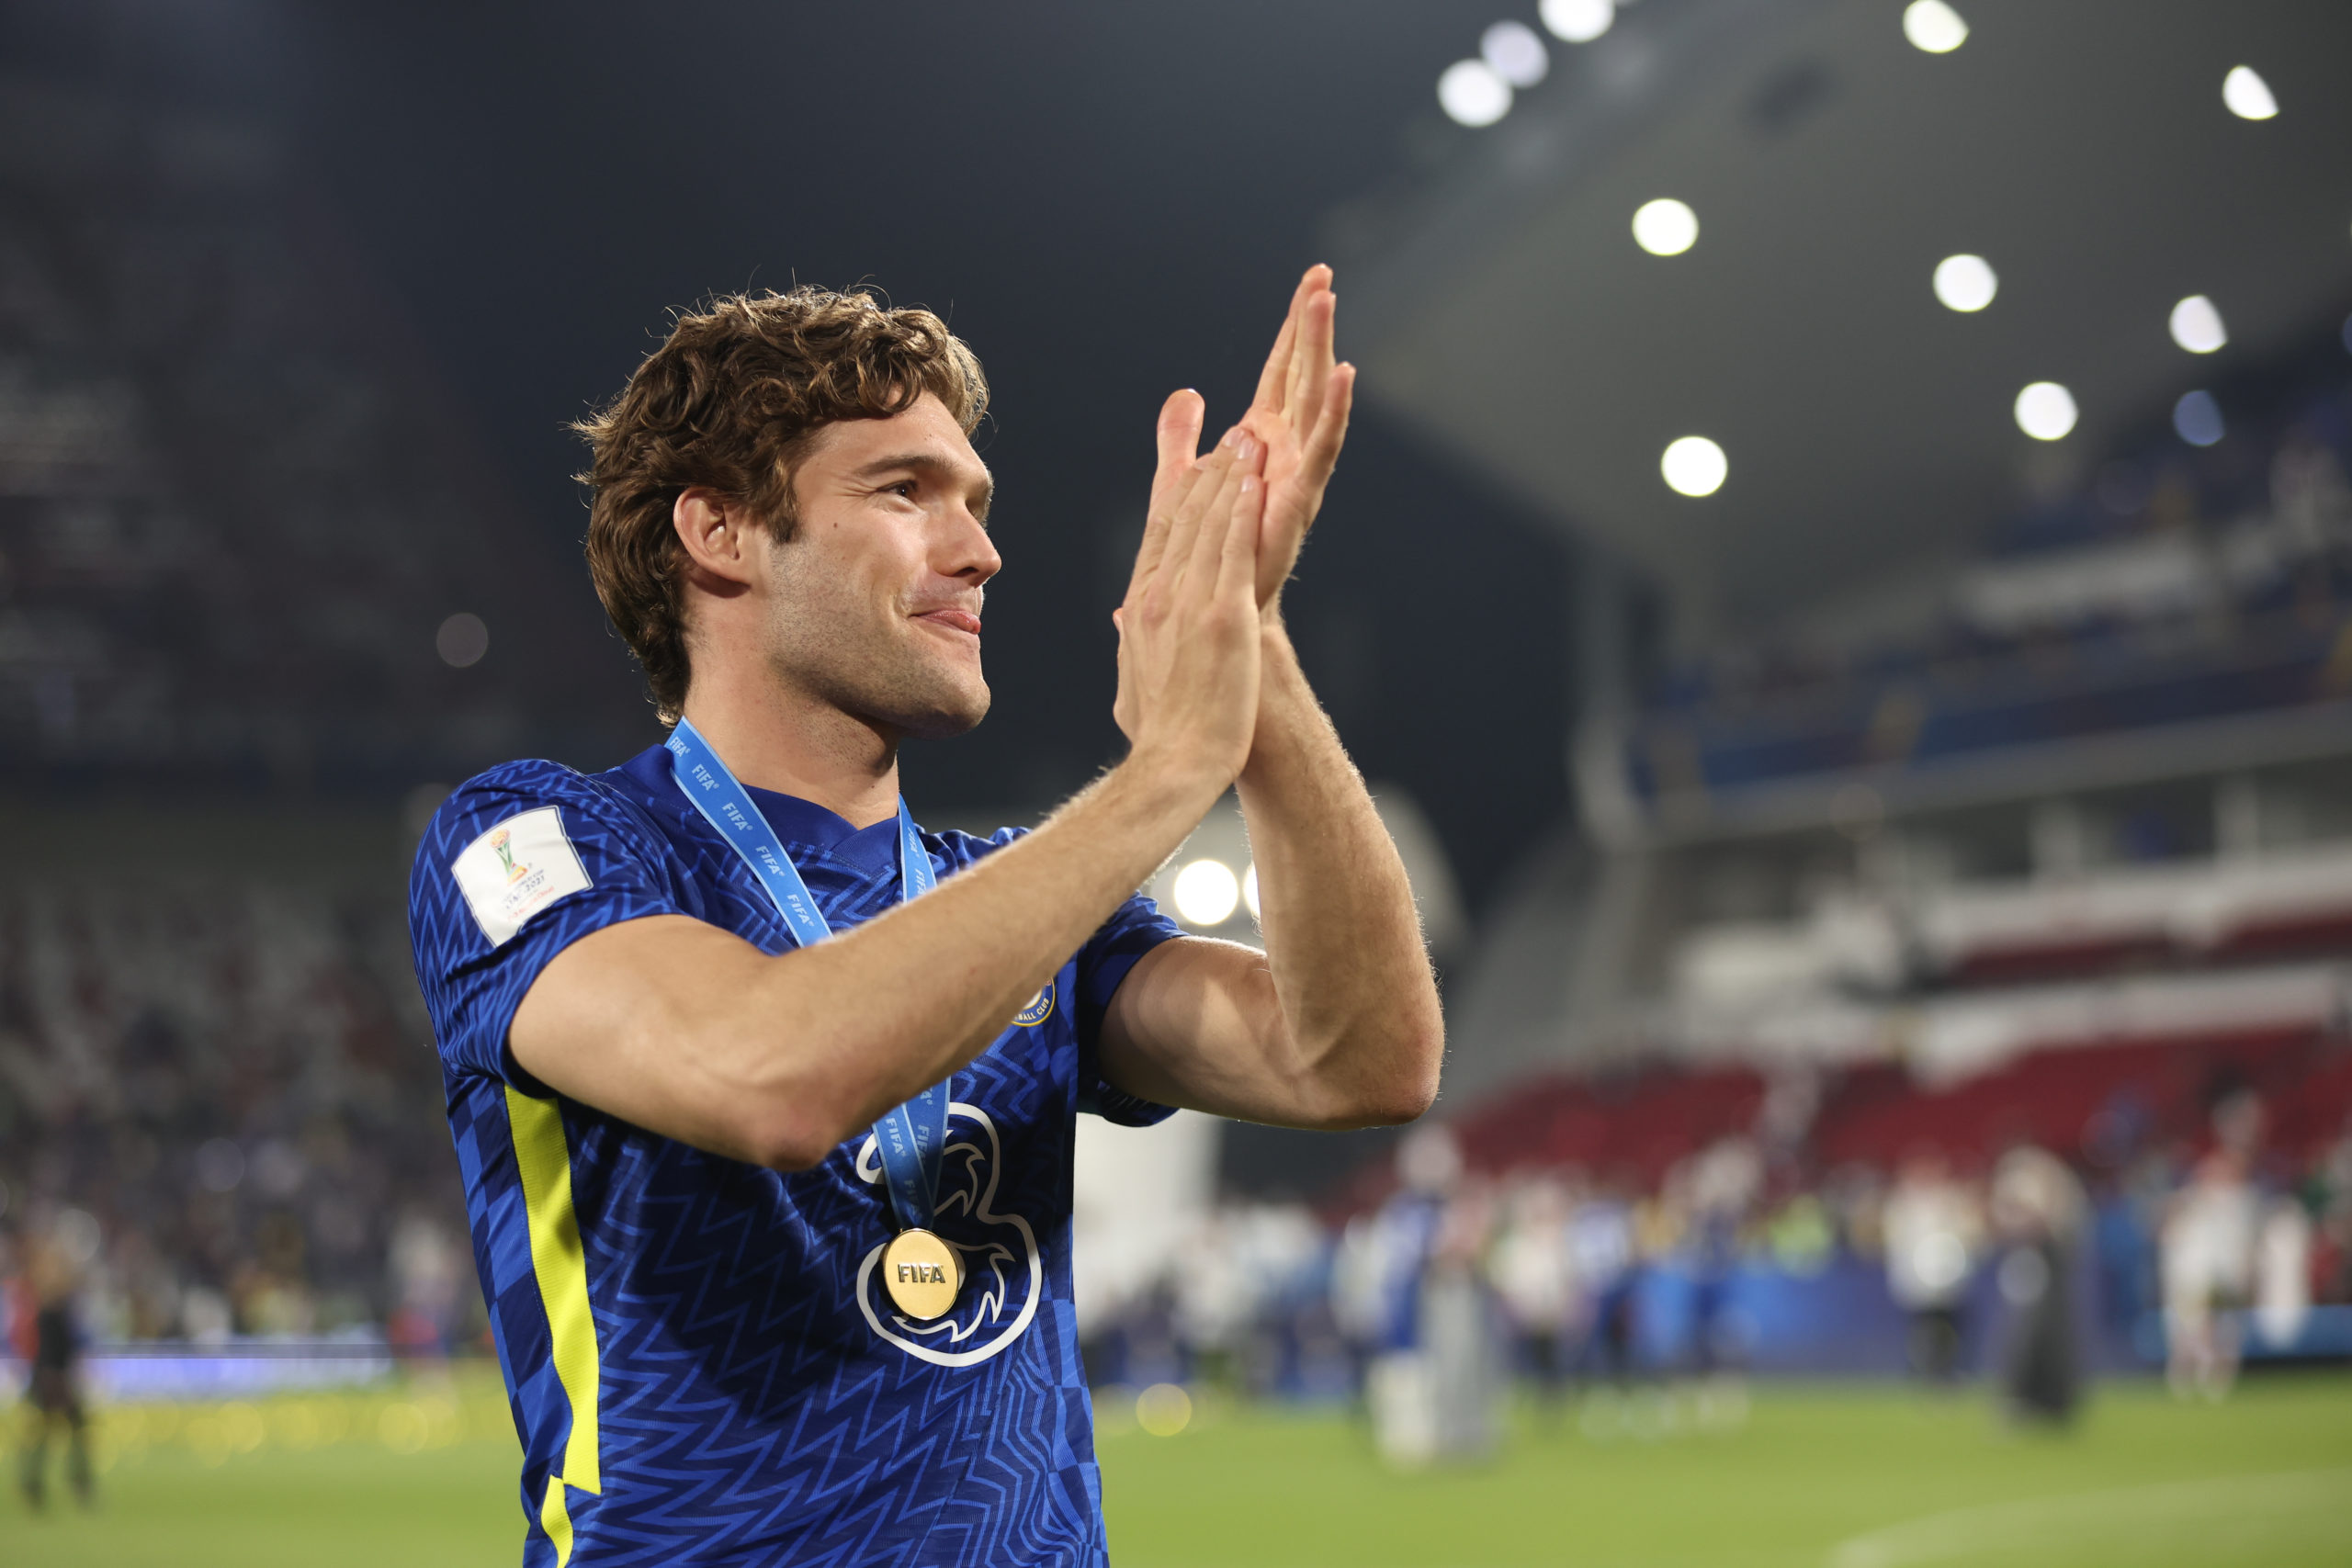 ‘I feel great’: Chelsea player says he wants to stay at the Bridge after Club World Cup win